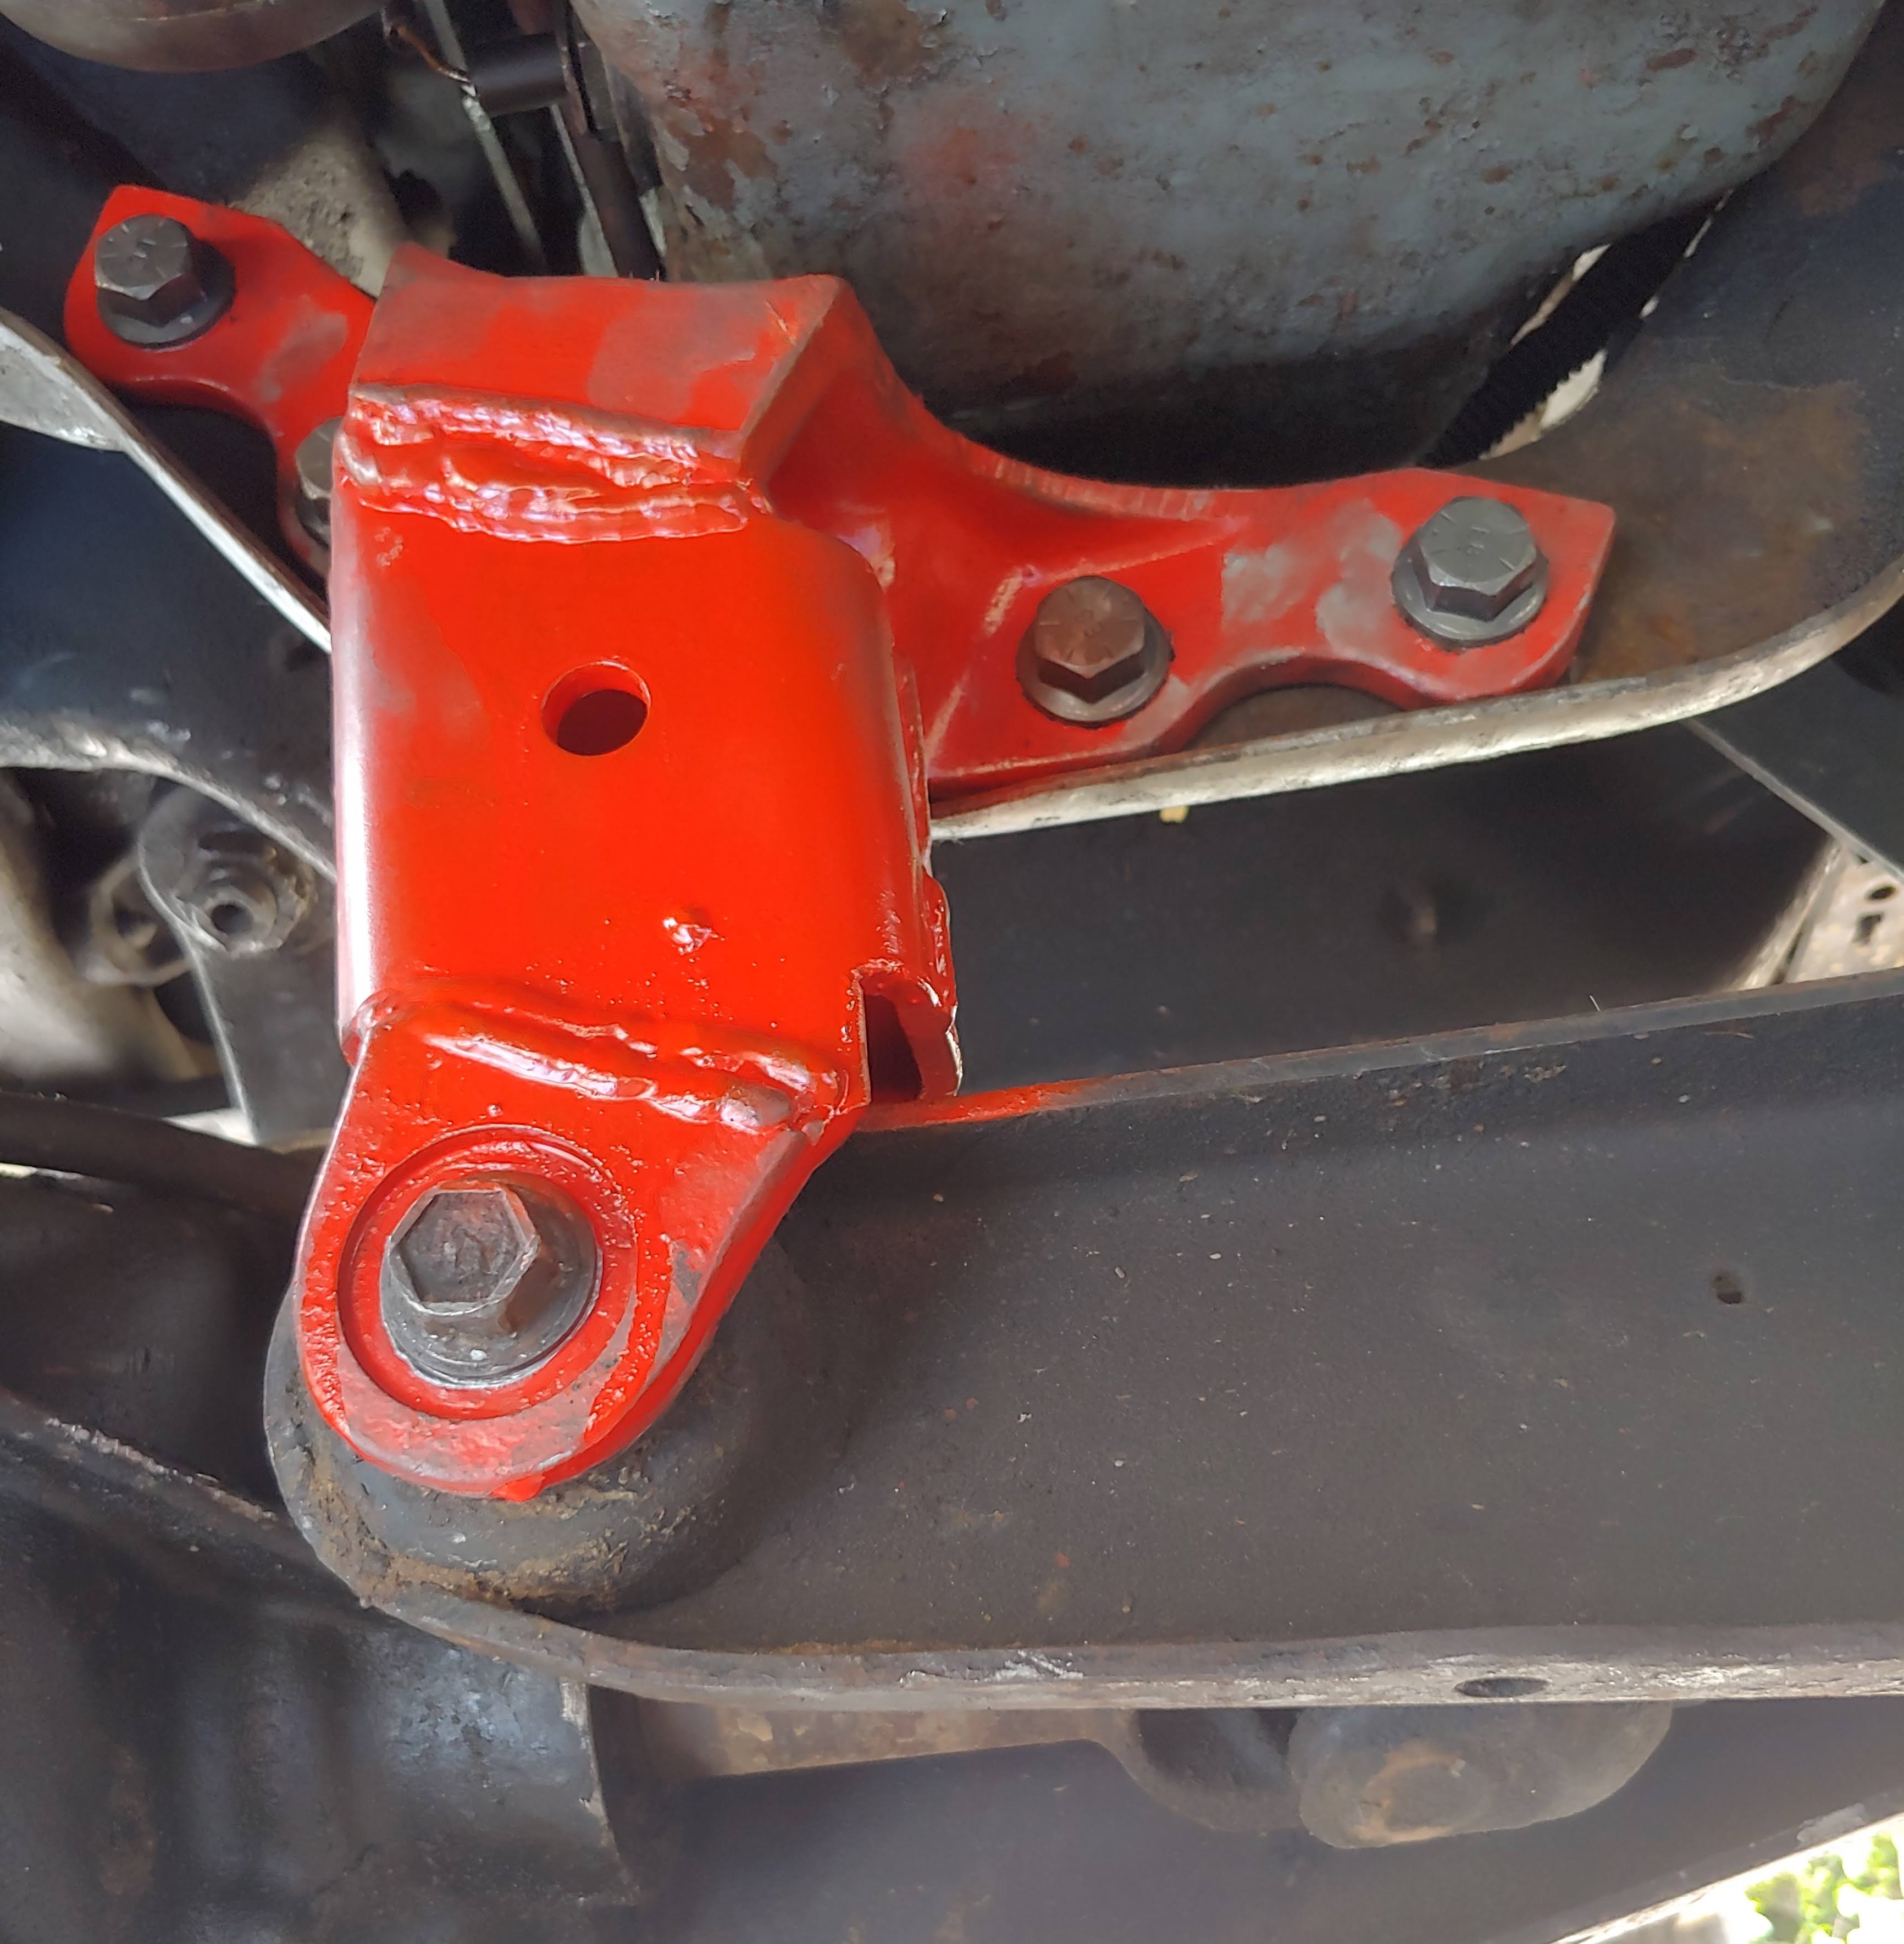 New front suspension pivot installed